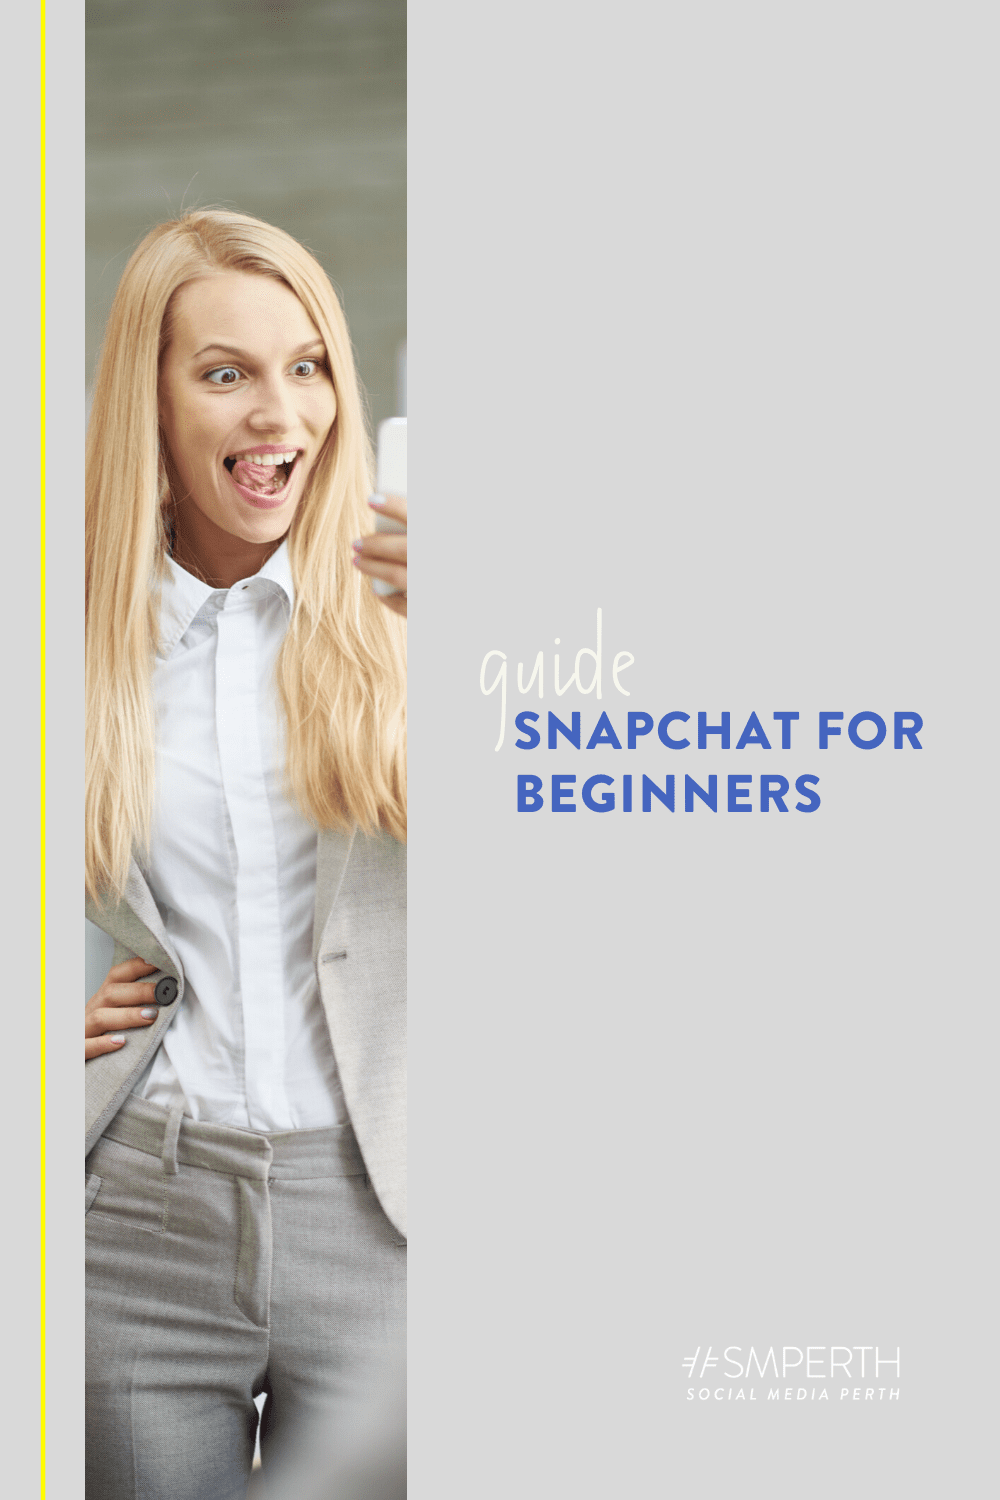 Snapchat in 2020: An Introduction for Beginners